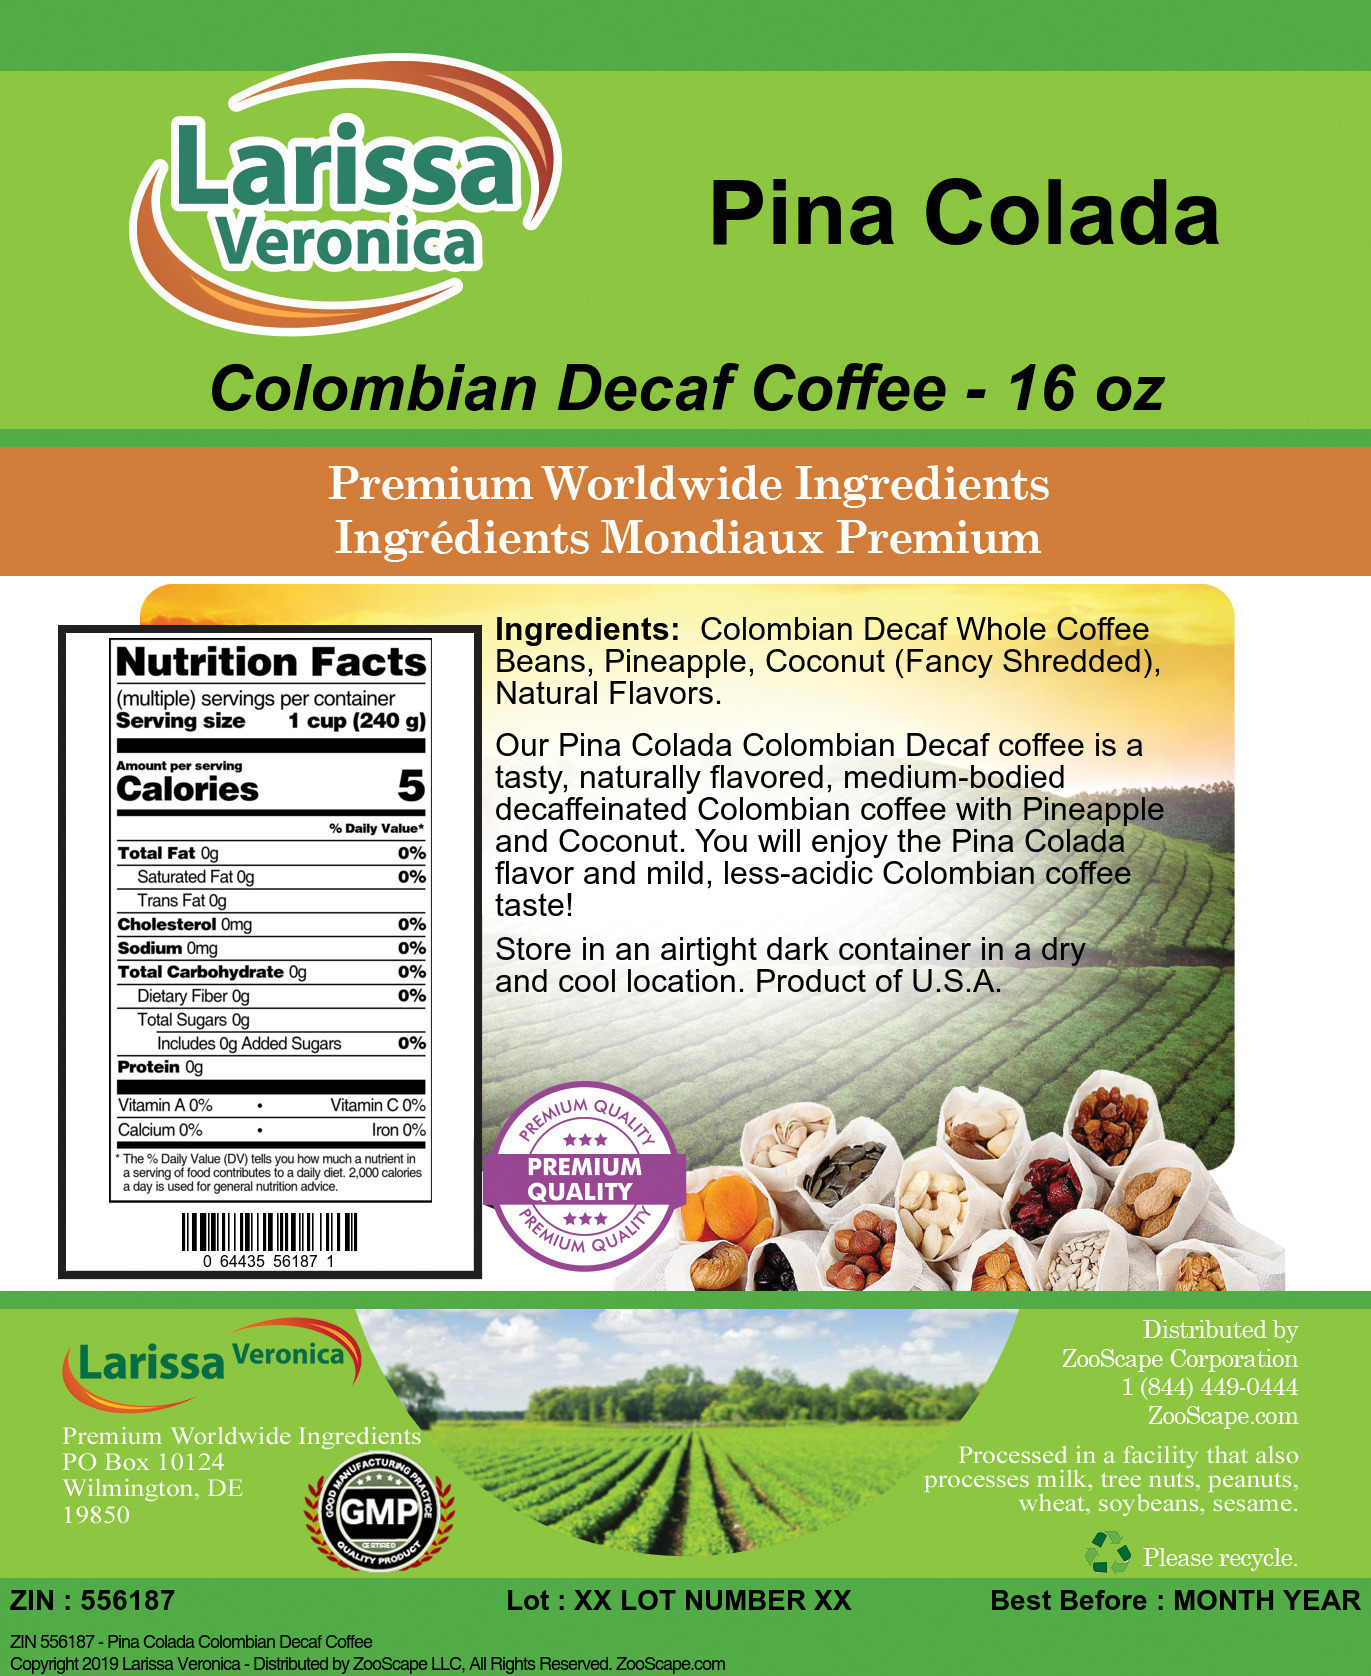 Pina Colada Colombian Decaf Coffee - Label